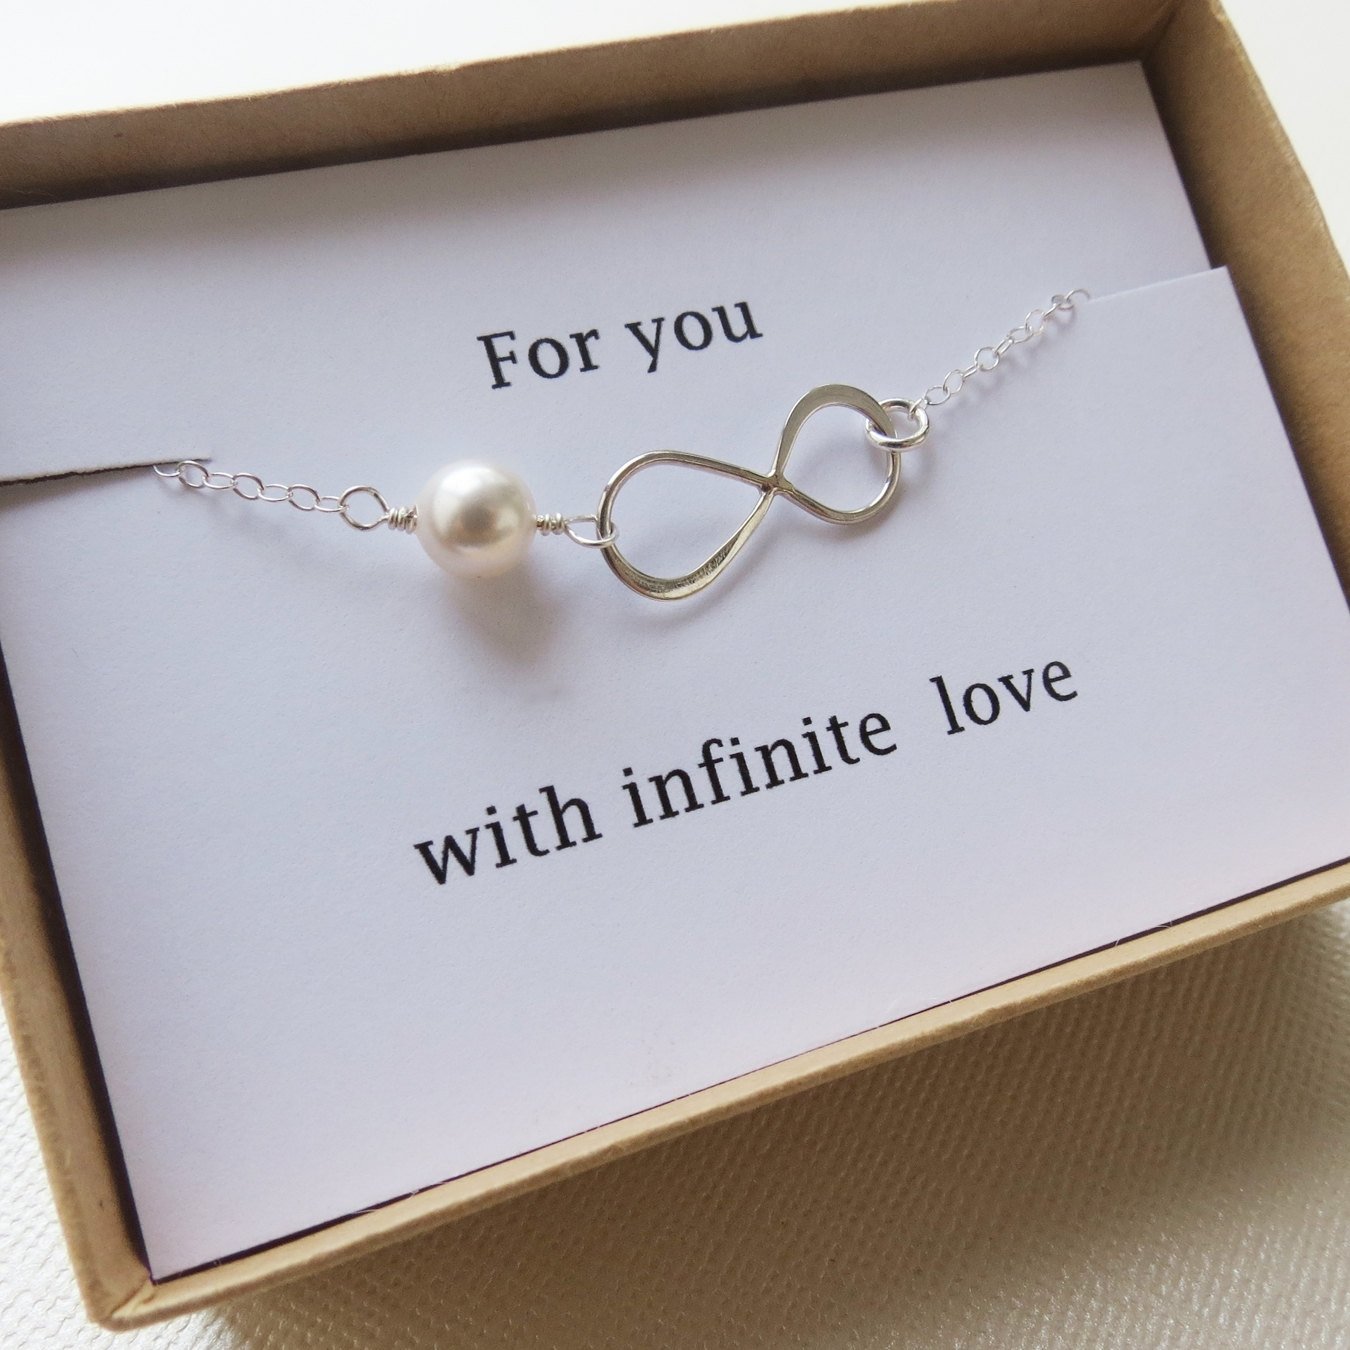 10 Attractive Christmas Gift Ideas For A Girlfriend infinity bracelet love holiday gift infinity jewelry card 1 2022